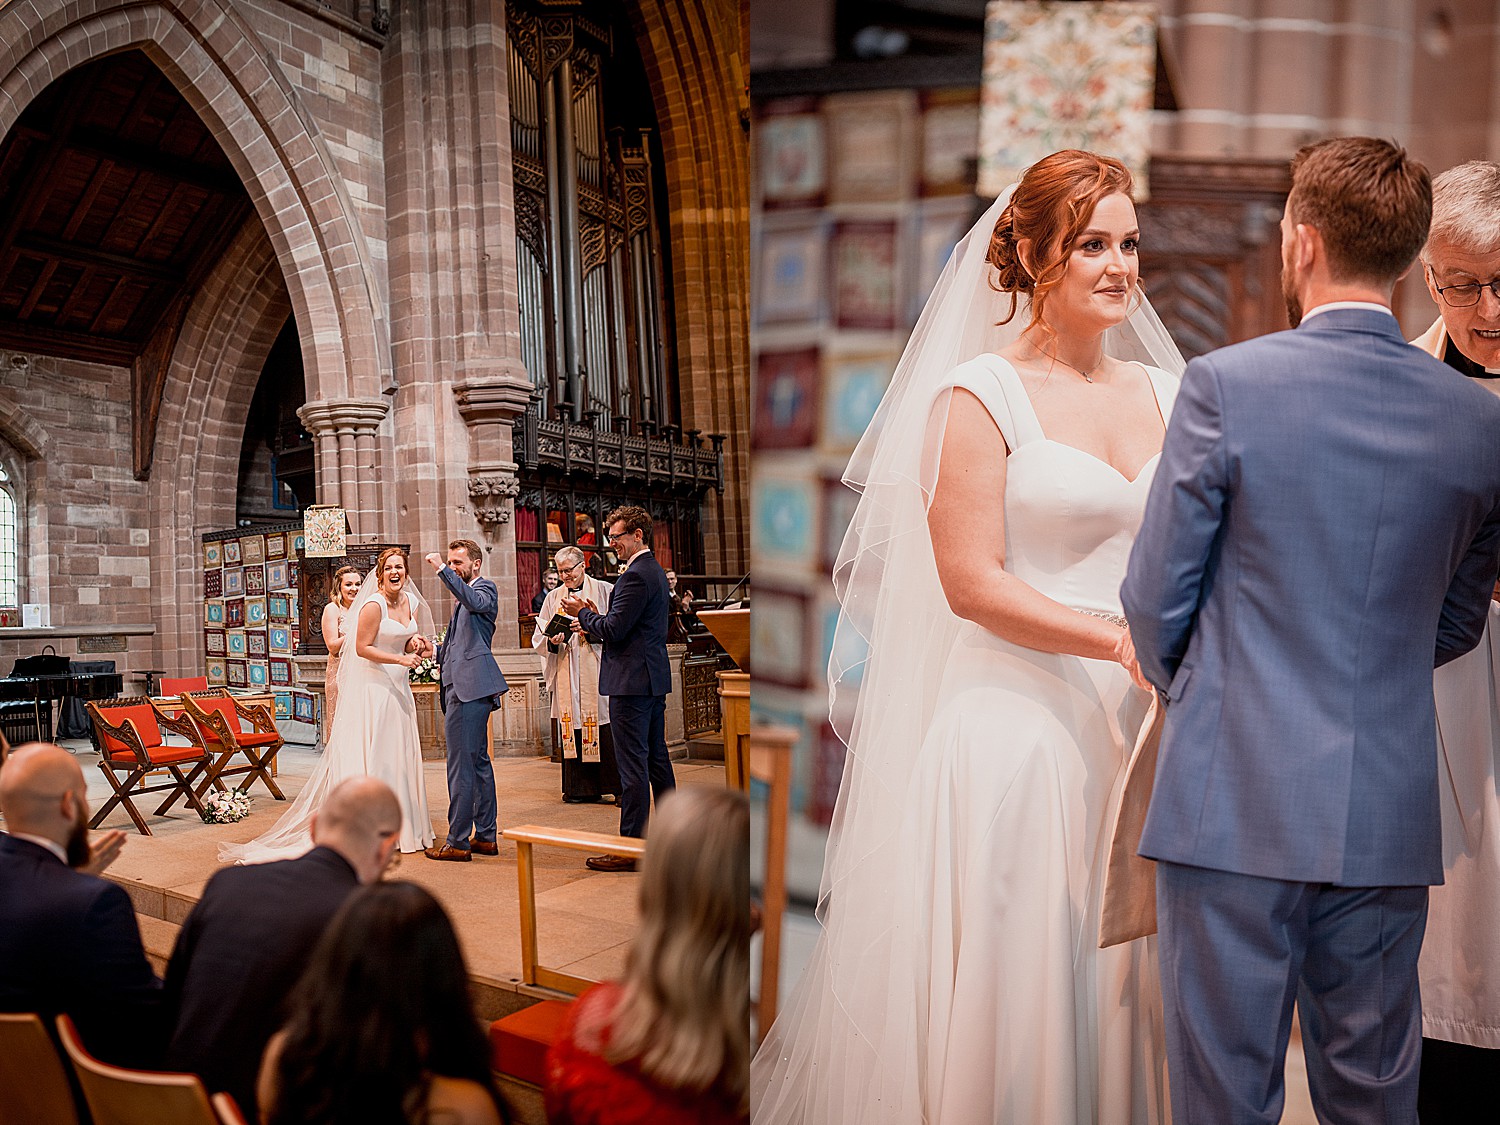 The marriage ceremony at Mossley Hill church